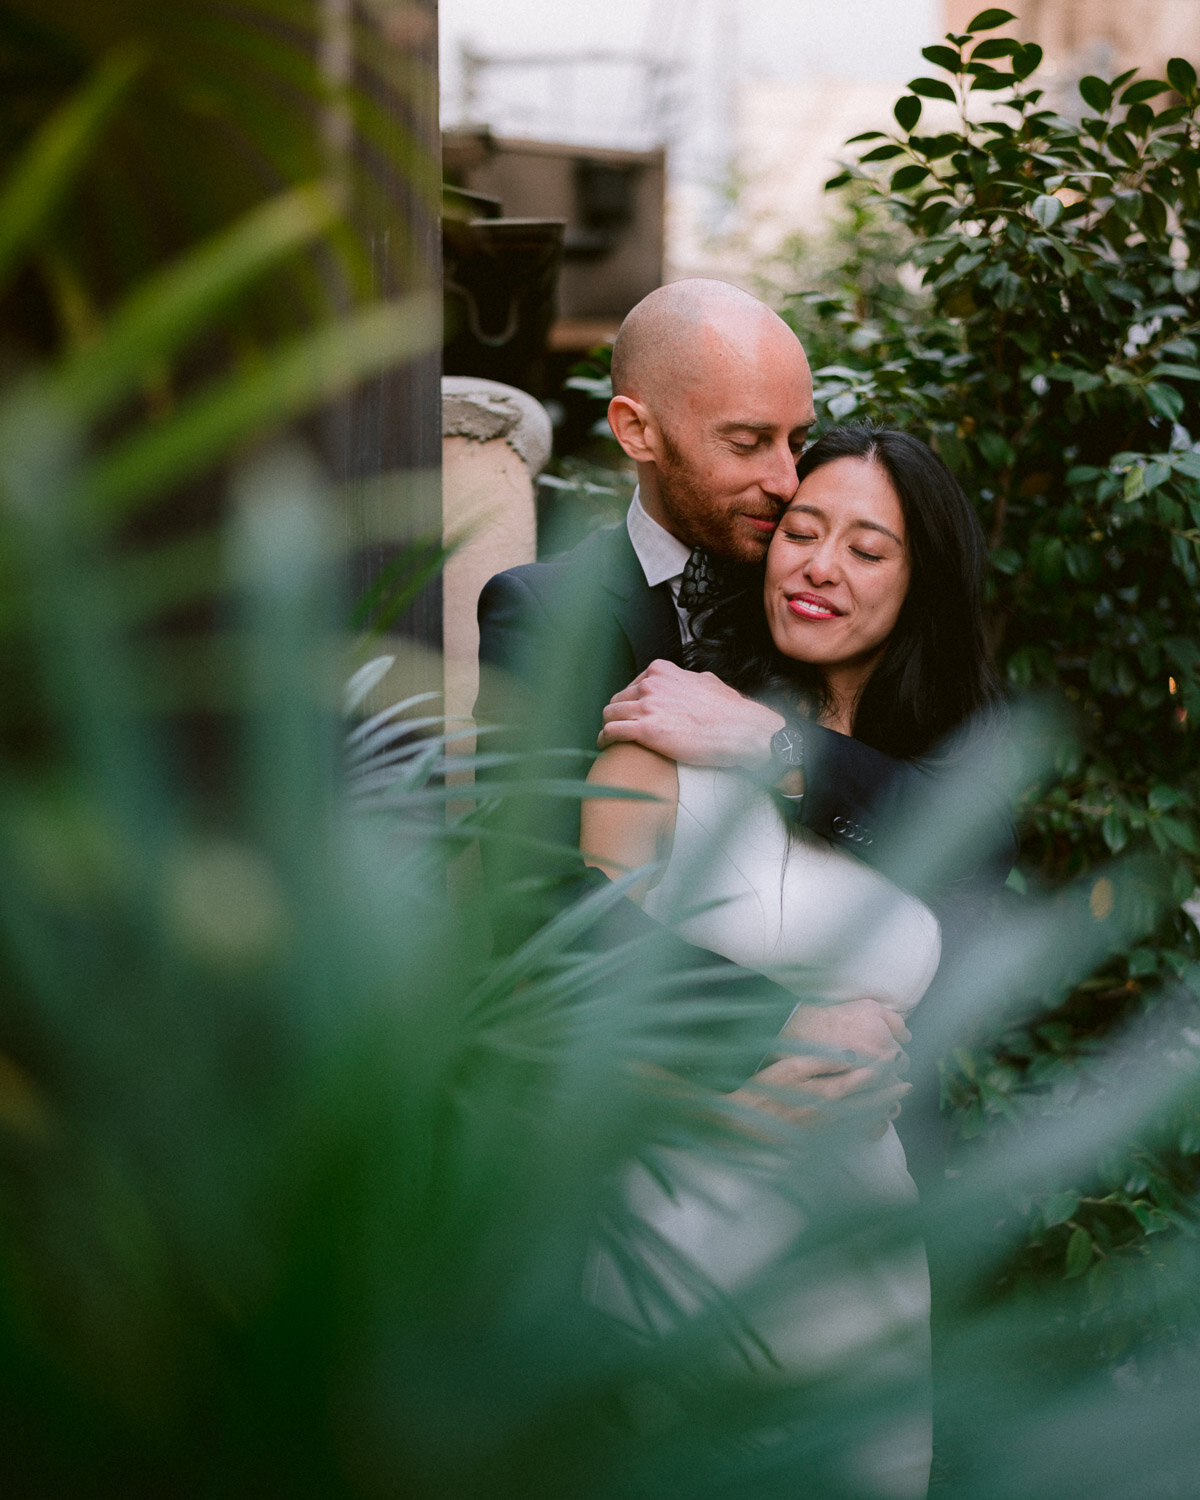 Romantic and Natural Wedding Photography in Tokyo, Japan